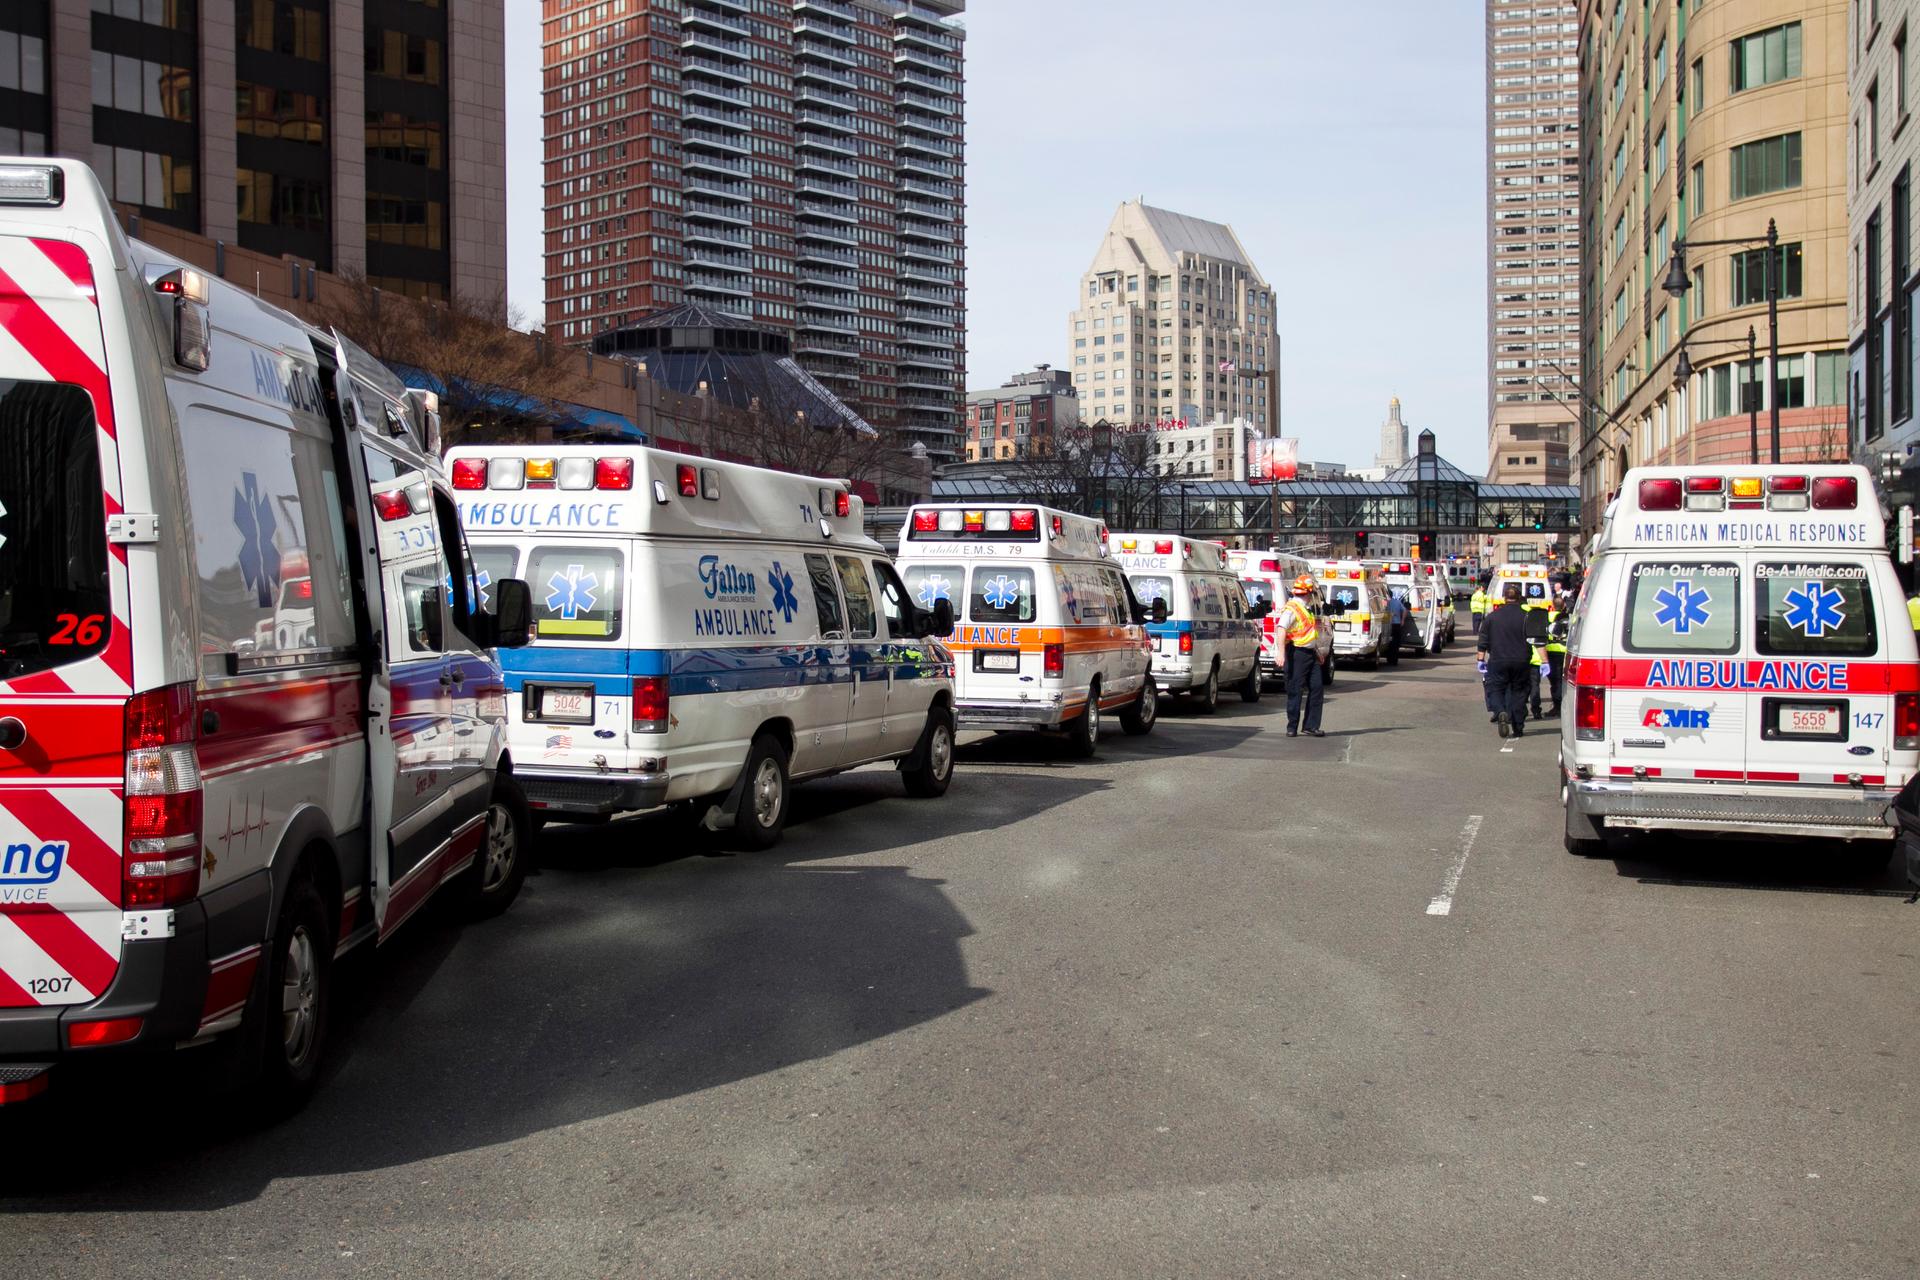 Ambulances line the street after bomb explosions interrupted the running of the 117th Boston Marathon in Boston.